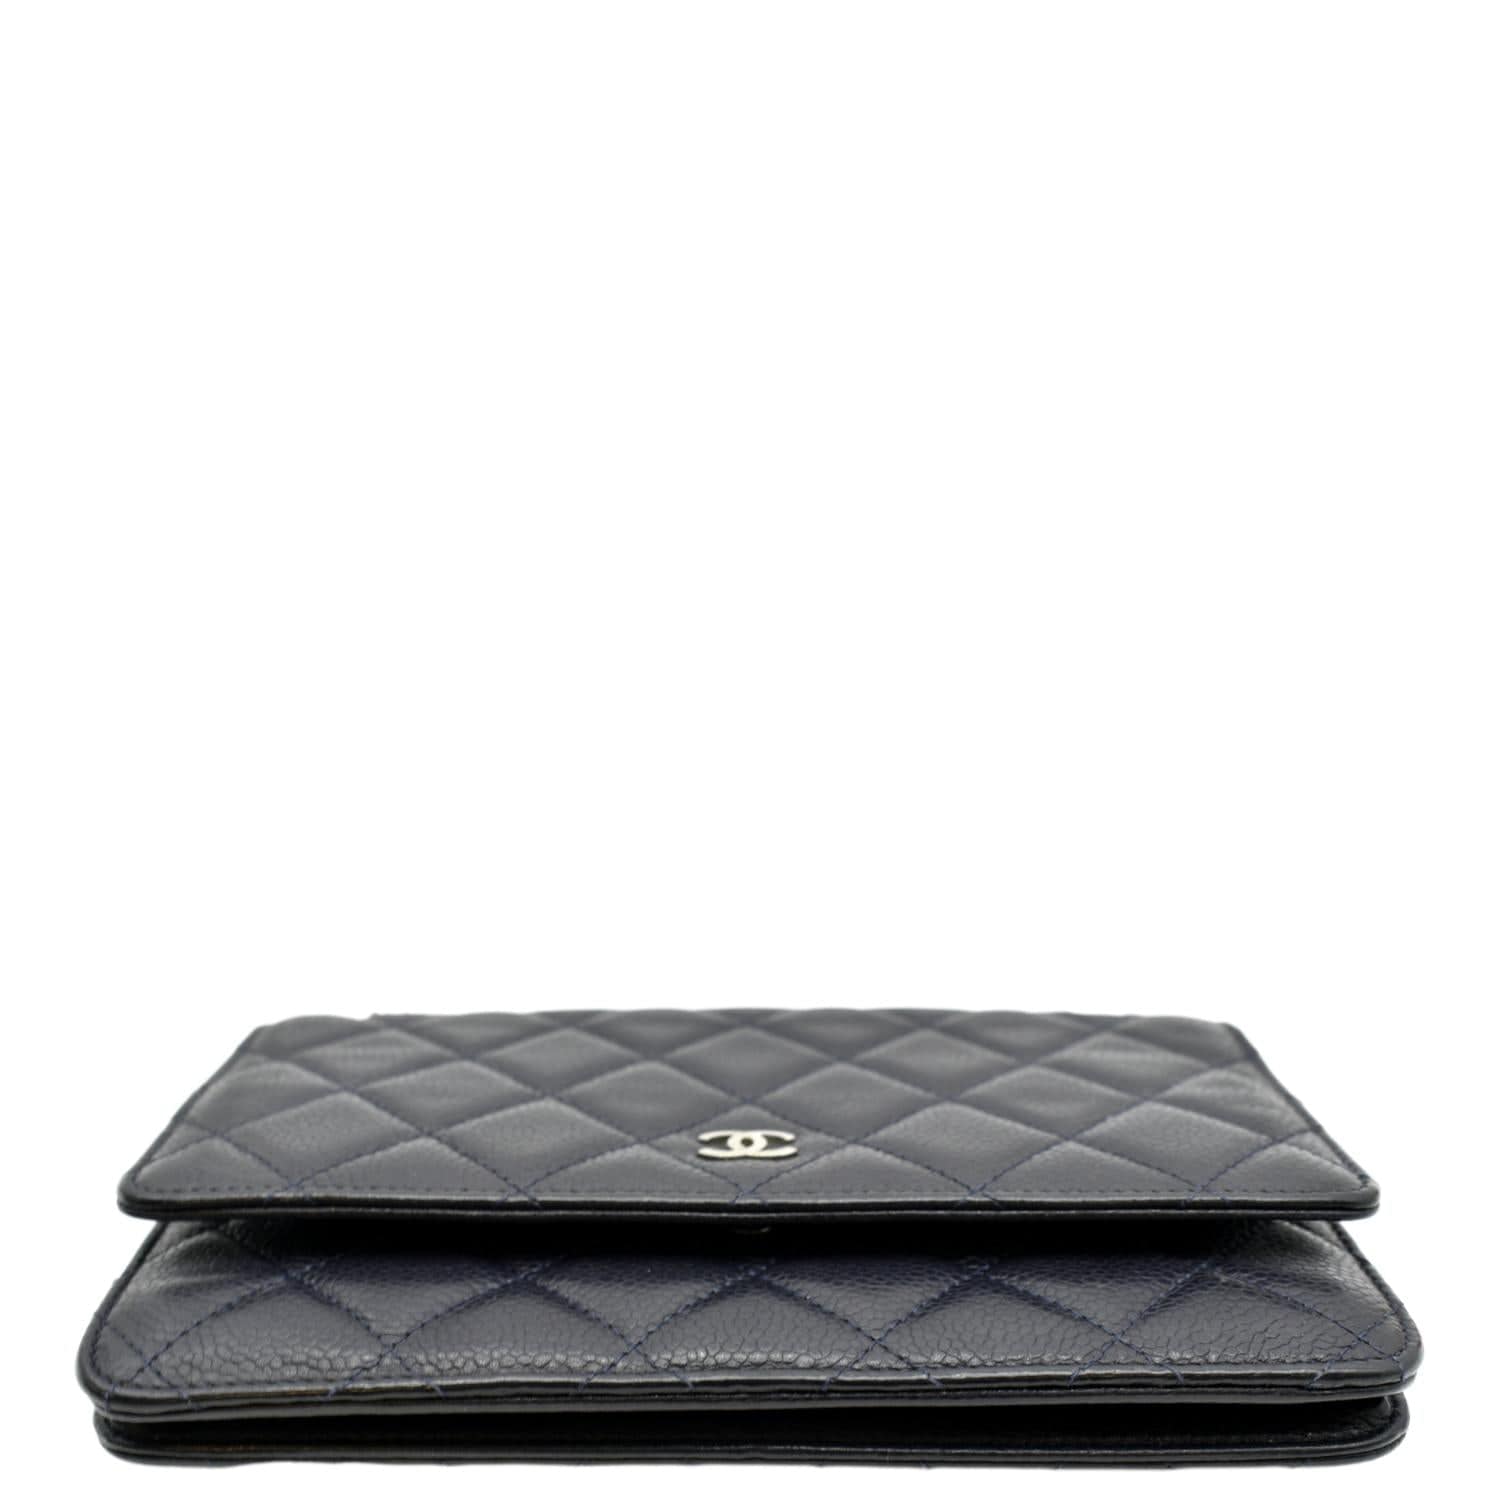 Chanel Black Quilted Caviar Leather Classic Strap Pouch Wallet